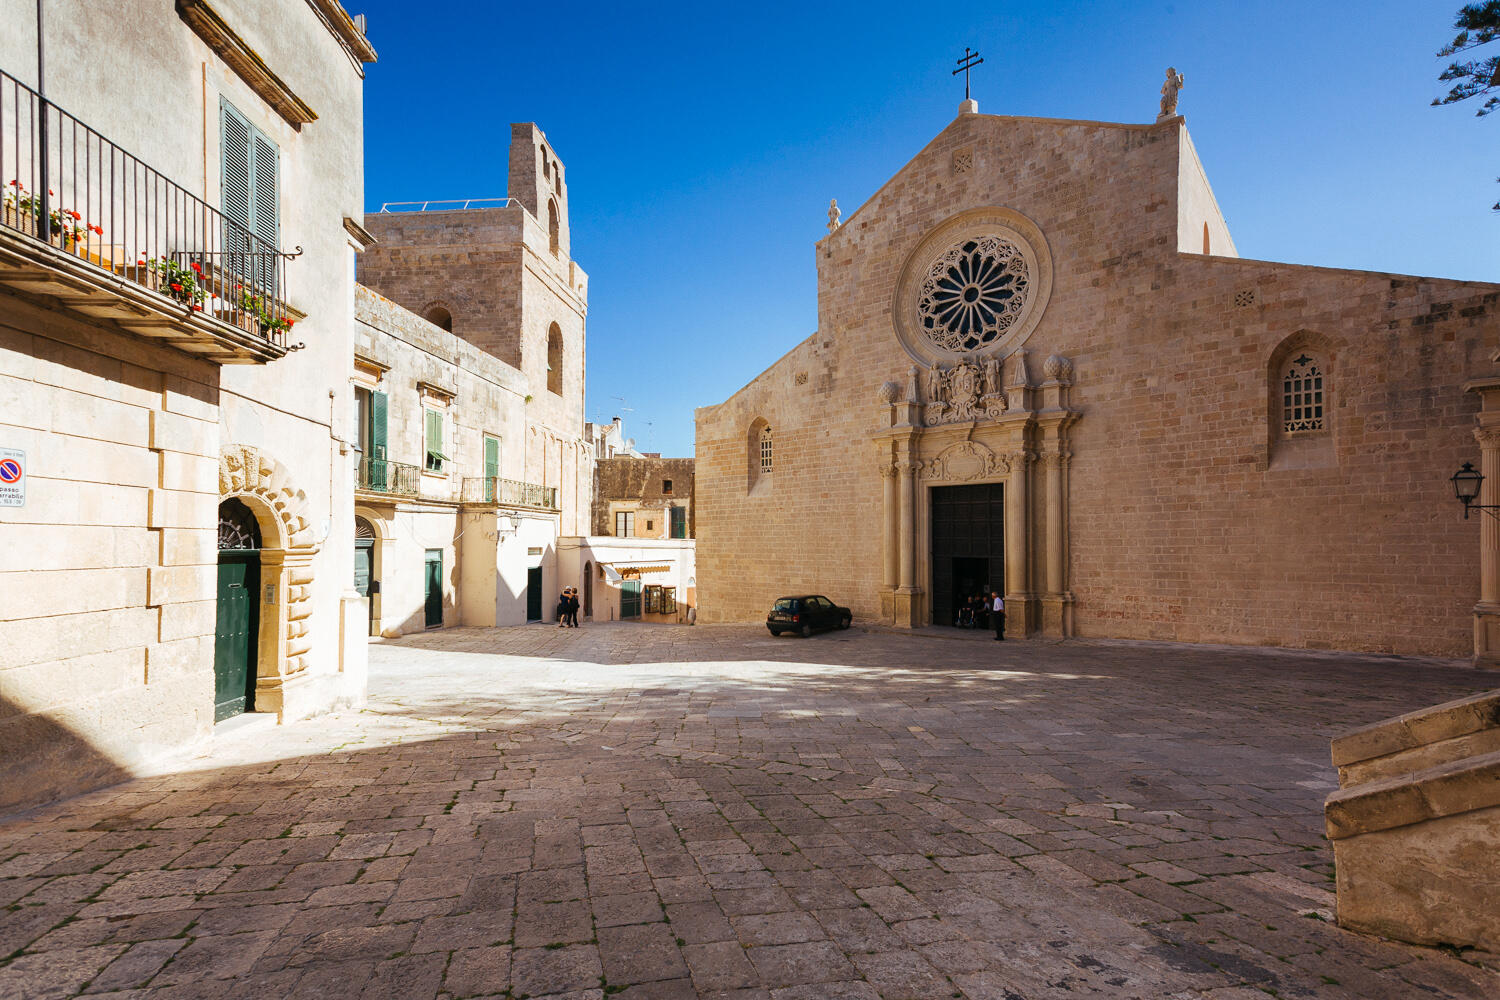 Otranto, historic center with important romanic cathedral mosaic(2)